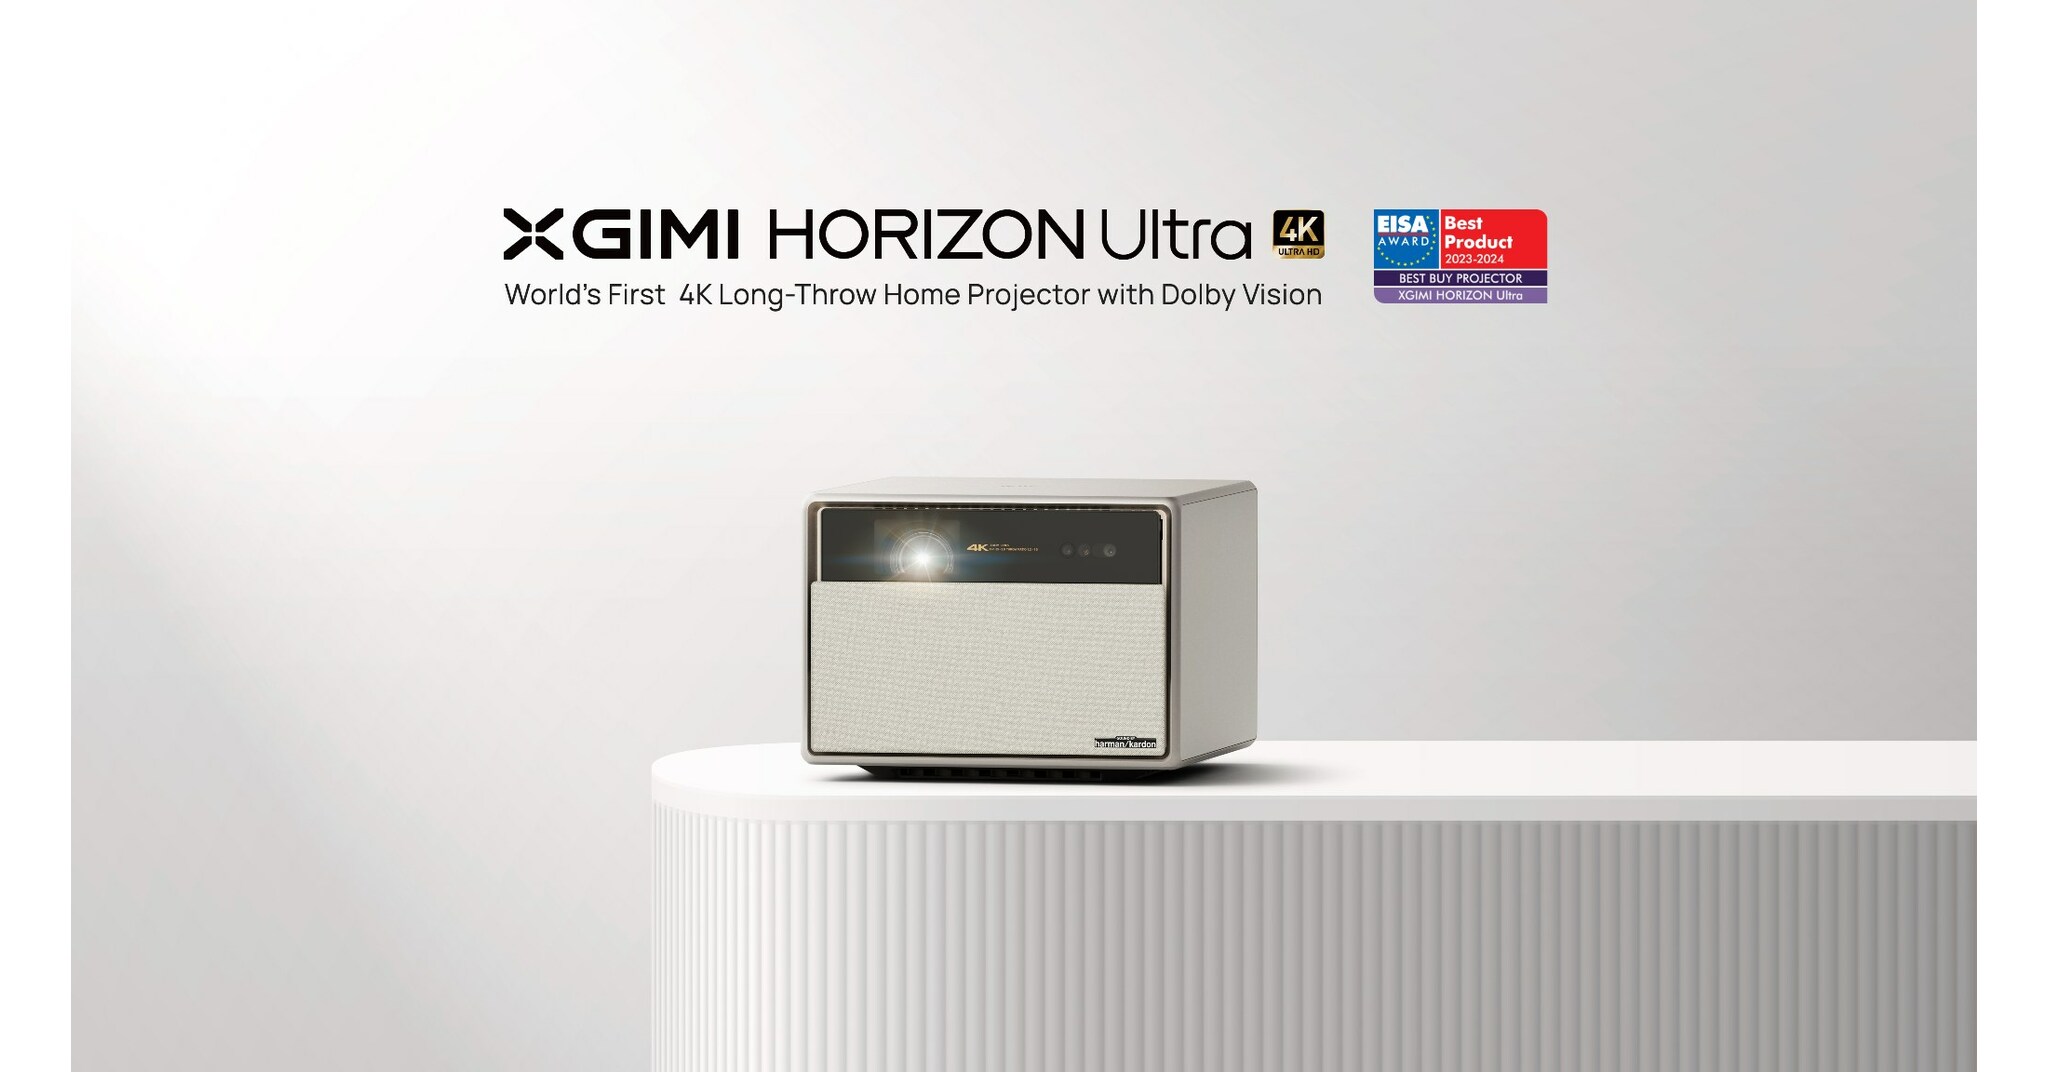 XGIMI Horizon Ultra review: The fantastic 4K projector that merges